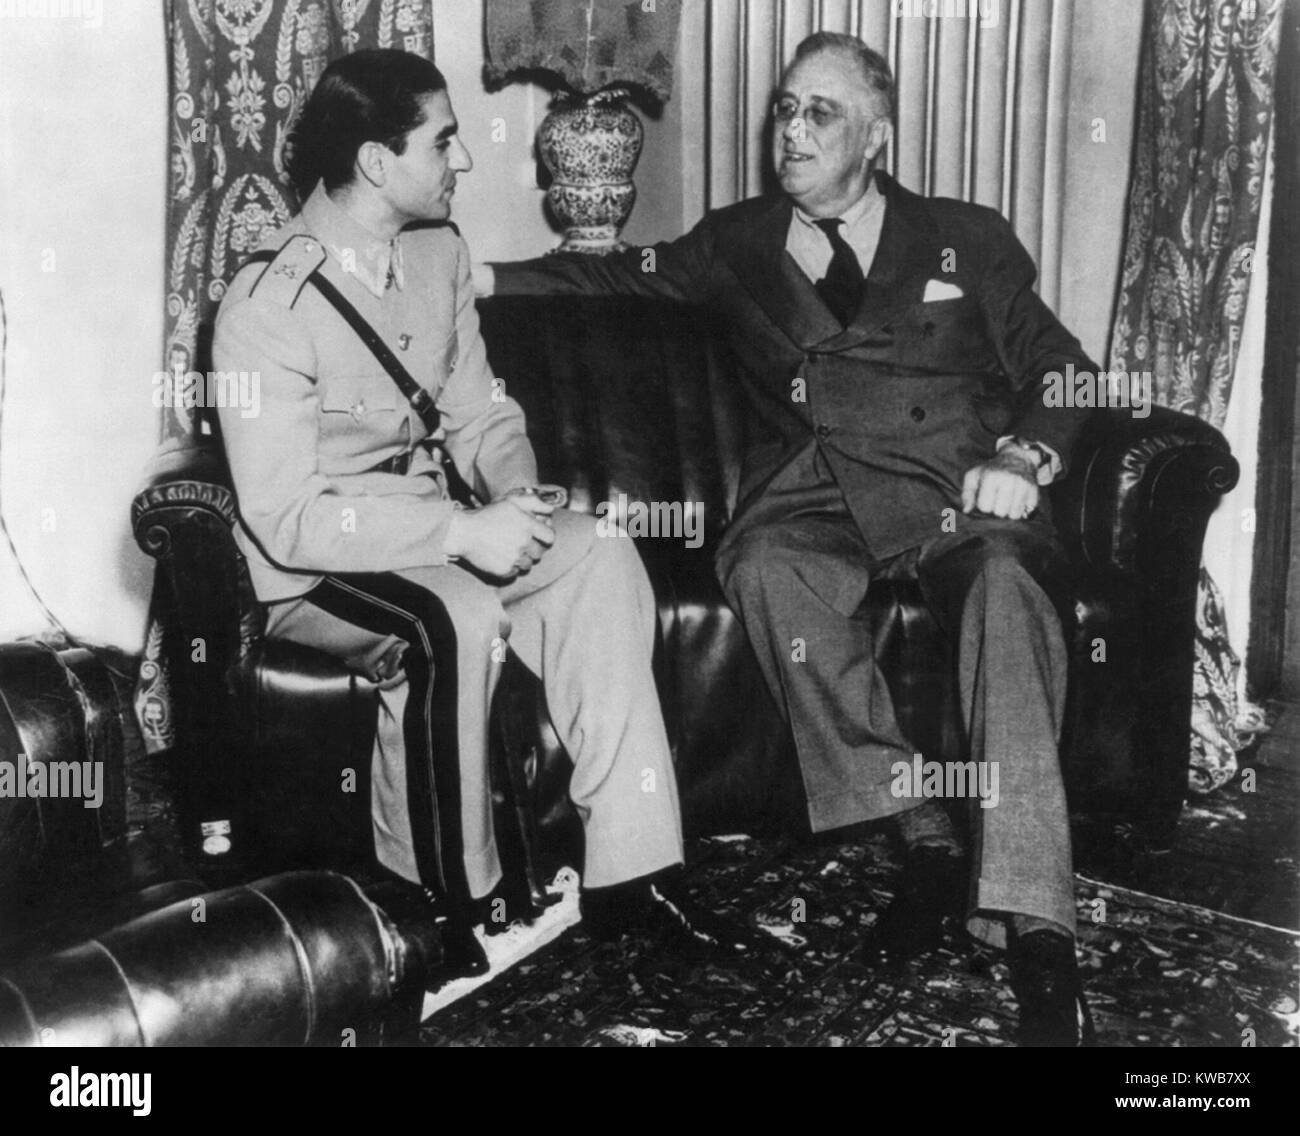 Reza Pahlevi, Shah of Iran, with President Roosevelt during the Teheran Conference. Nov. 28-Dec. 1, 1943. Mohammad Reza Pahlavi, then 24, came to limited power after an Anglo-Soviet invasion of Iran forced the abdication of his father, Axis leaning Reza Shah. World War 2. (BSLOC 2014 8 191) Stock Photo